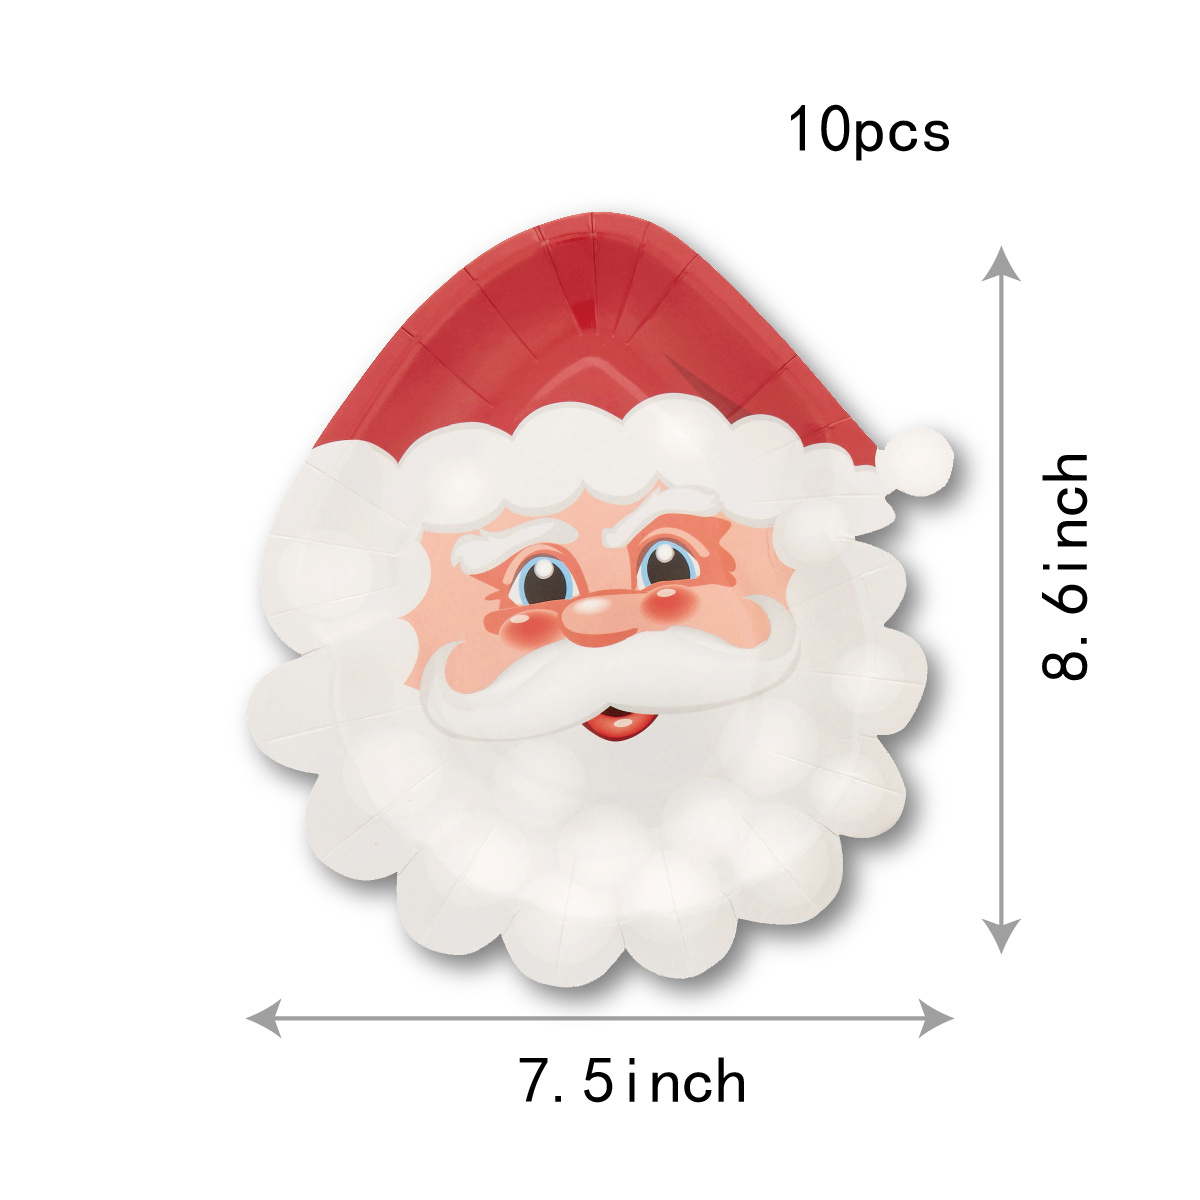 10pcs-9in Disposable Paper Plates With Santa Claus Print, Suitable For  Christmas Party, Birthday, Outdoor Bbq And Camping